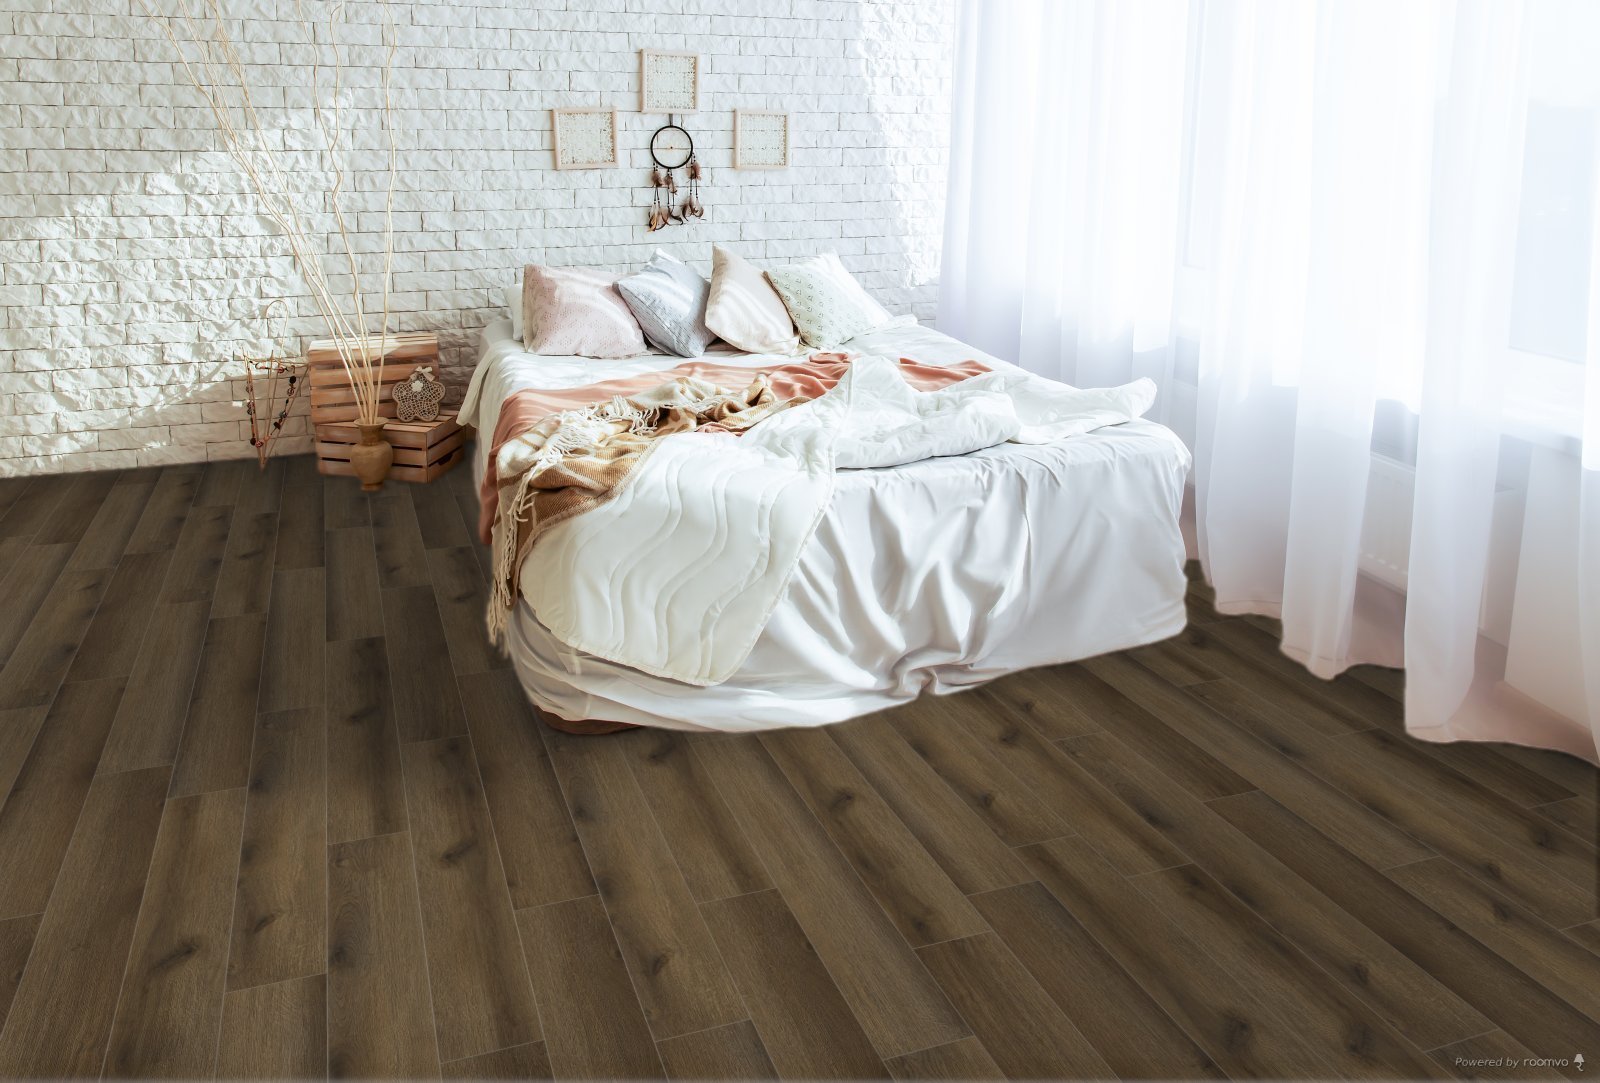 Horizen Flooring presents to you a picture of a quality wide plank Meredith luxury vinyl plank. NovoCore Q Merengue collection features a wide range of colors & designs that will compliment any interior. Natural wood grain synchronized surface allow for an authentic hardwood look & feel. This collection features a 0.3″ / 7.5 mm overall thickness and a durable 22 mil / 0.55 mm wear layer for residential and commercial applications.